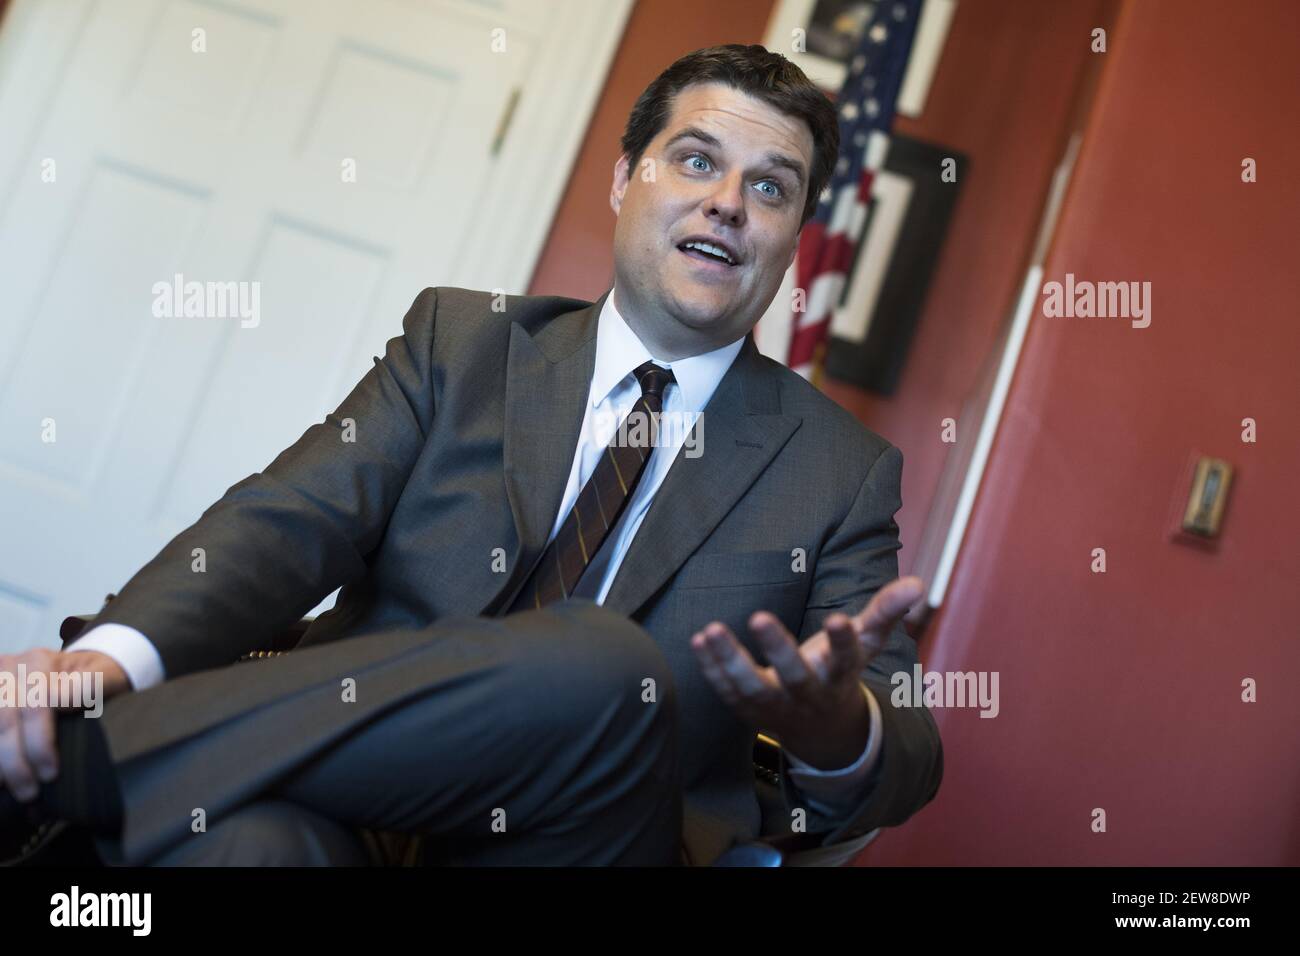 UNITED STATES - OCTOBER 26: Rep. Matt Gaetz, R-Fla., is interviewed in his Cannon Building office on October 26, 2017. (Photo By Tom Williams/CQ Roll Call) Stock Photo